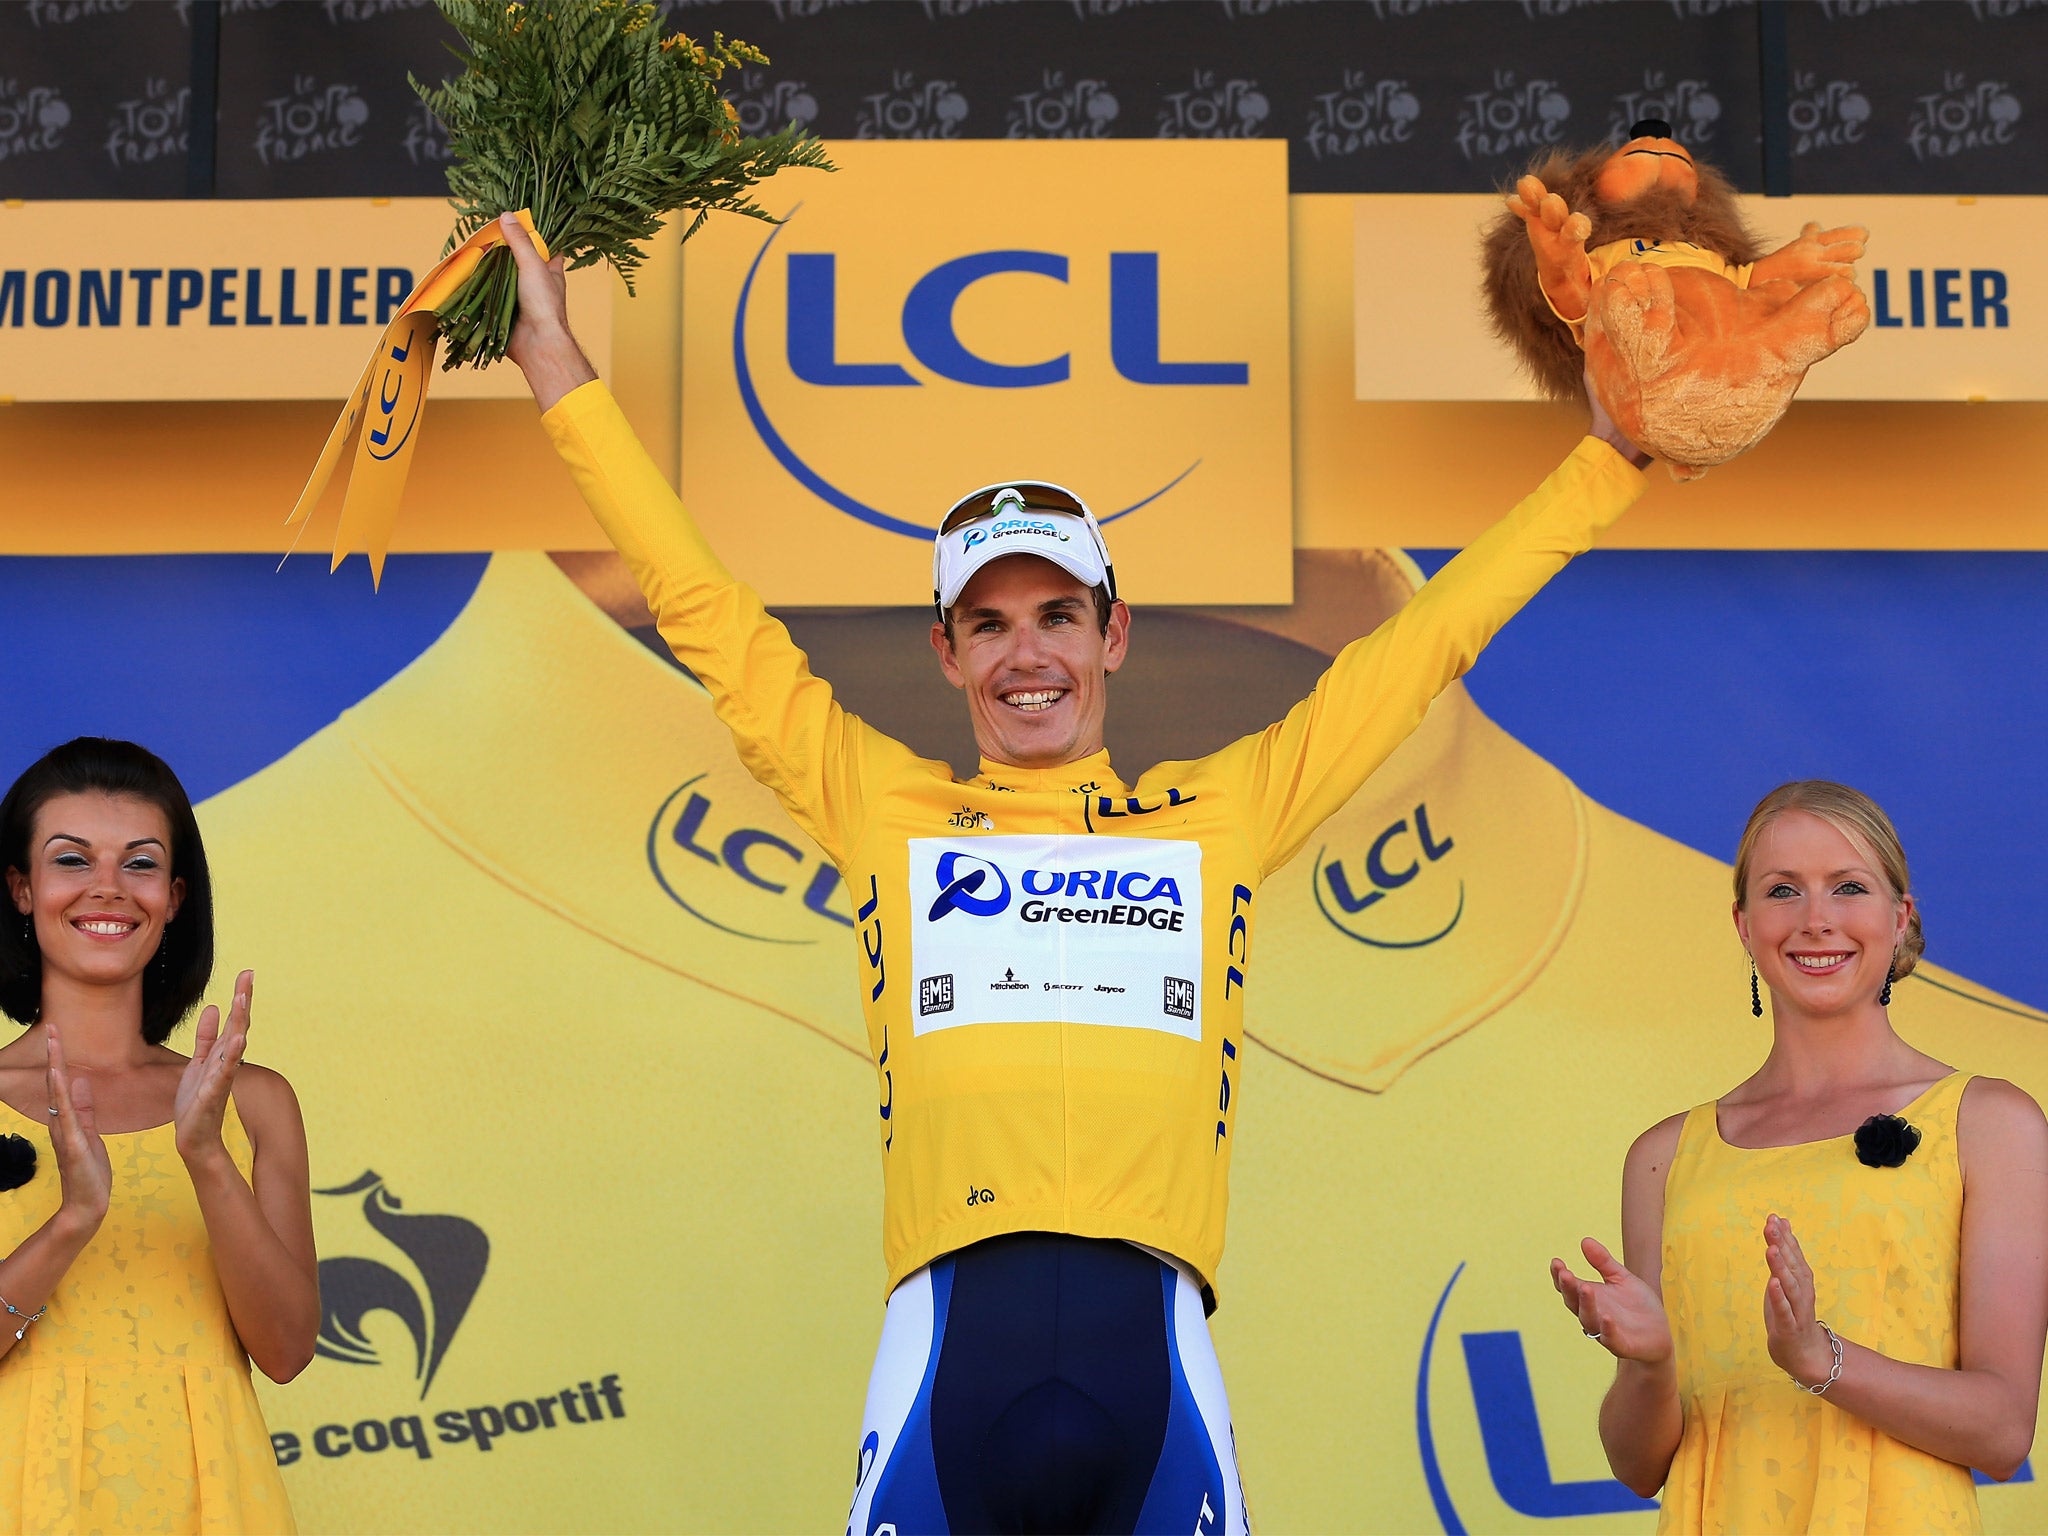 Last year Daryl Impey became the first African to wear the Tour de France yellow jersey